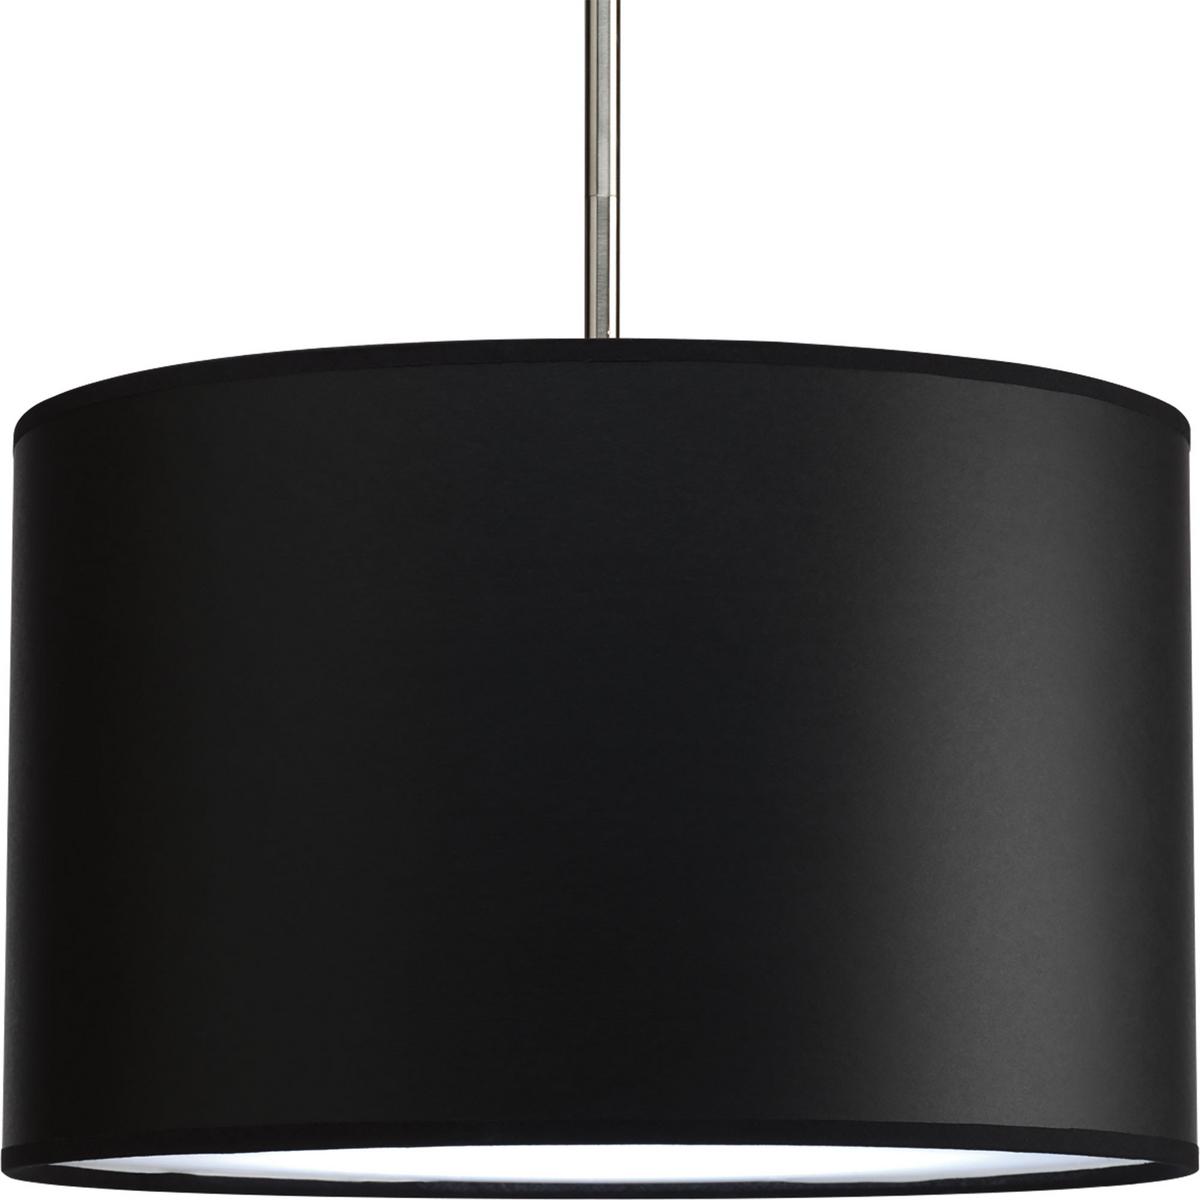 Hubbell P8822-01 The Markor Series is a modular pendant system. The versatile series allow the choice of shades and stem kits. This 16" shade with Black Parchment Paper is inspired by mid-century design. Acrylic bottom diffuser. This shade can be used with a variety of st